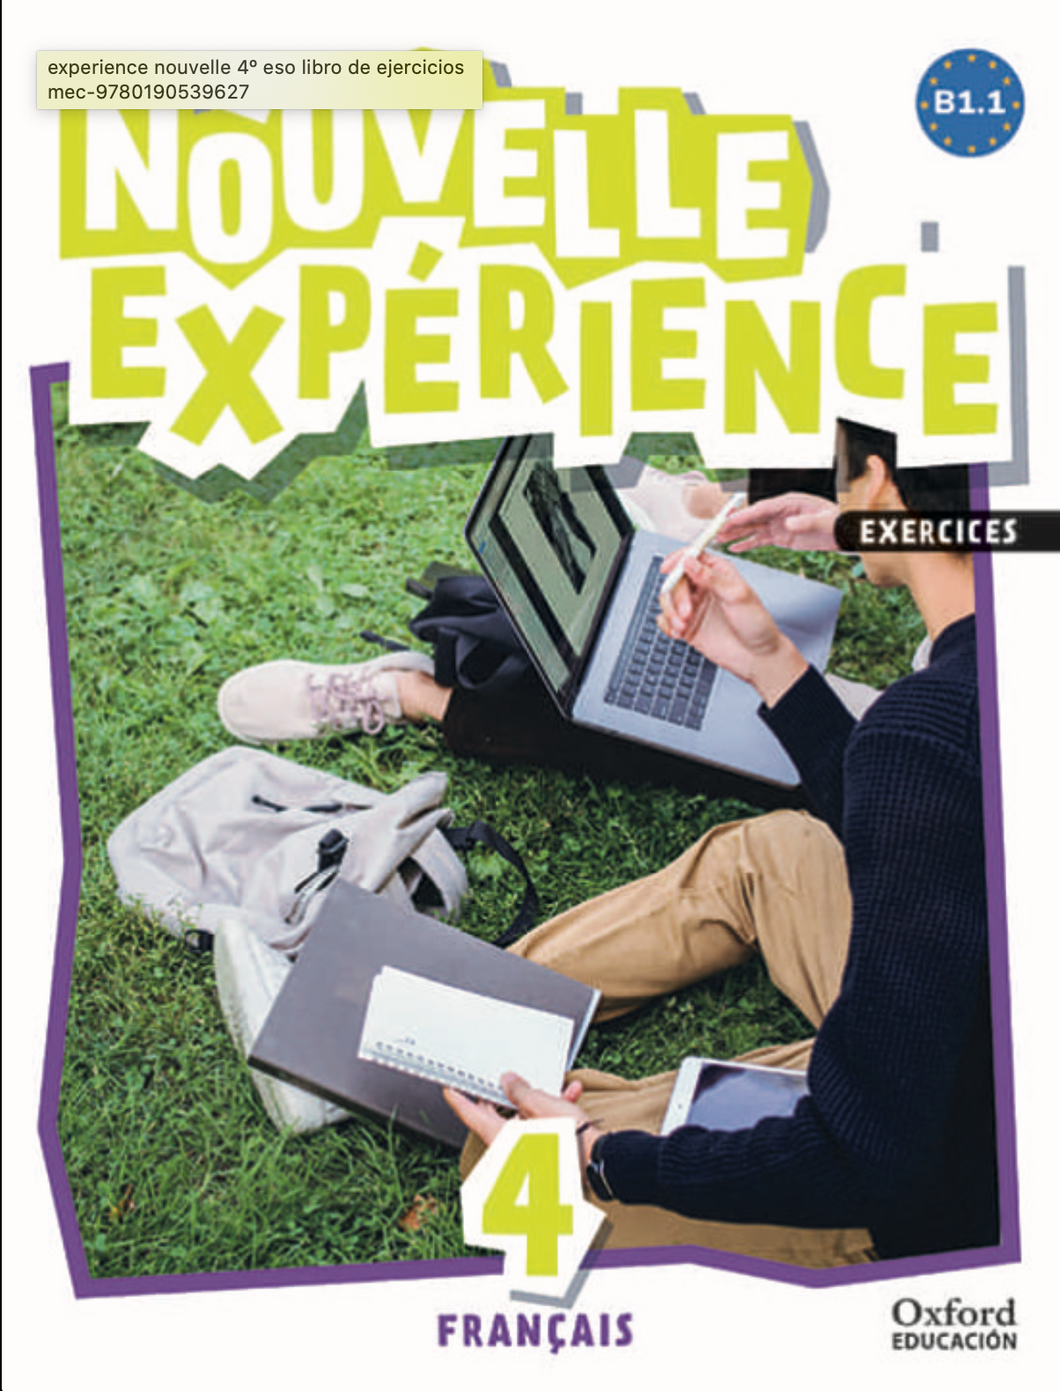 Experience Nouvelle 4.;exercicesLivre d'exercices